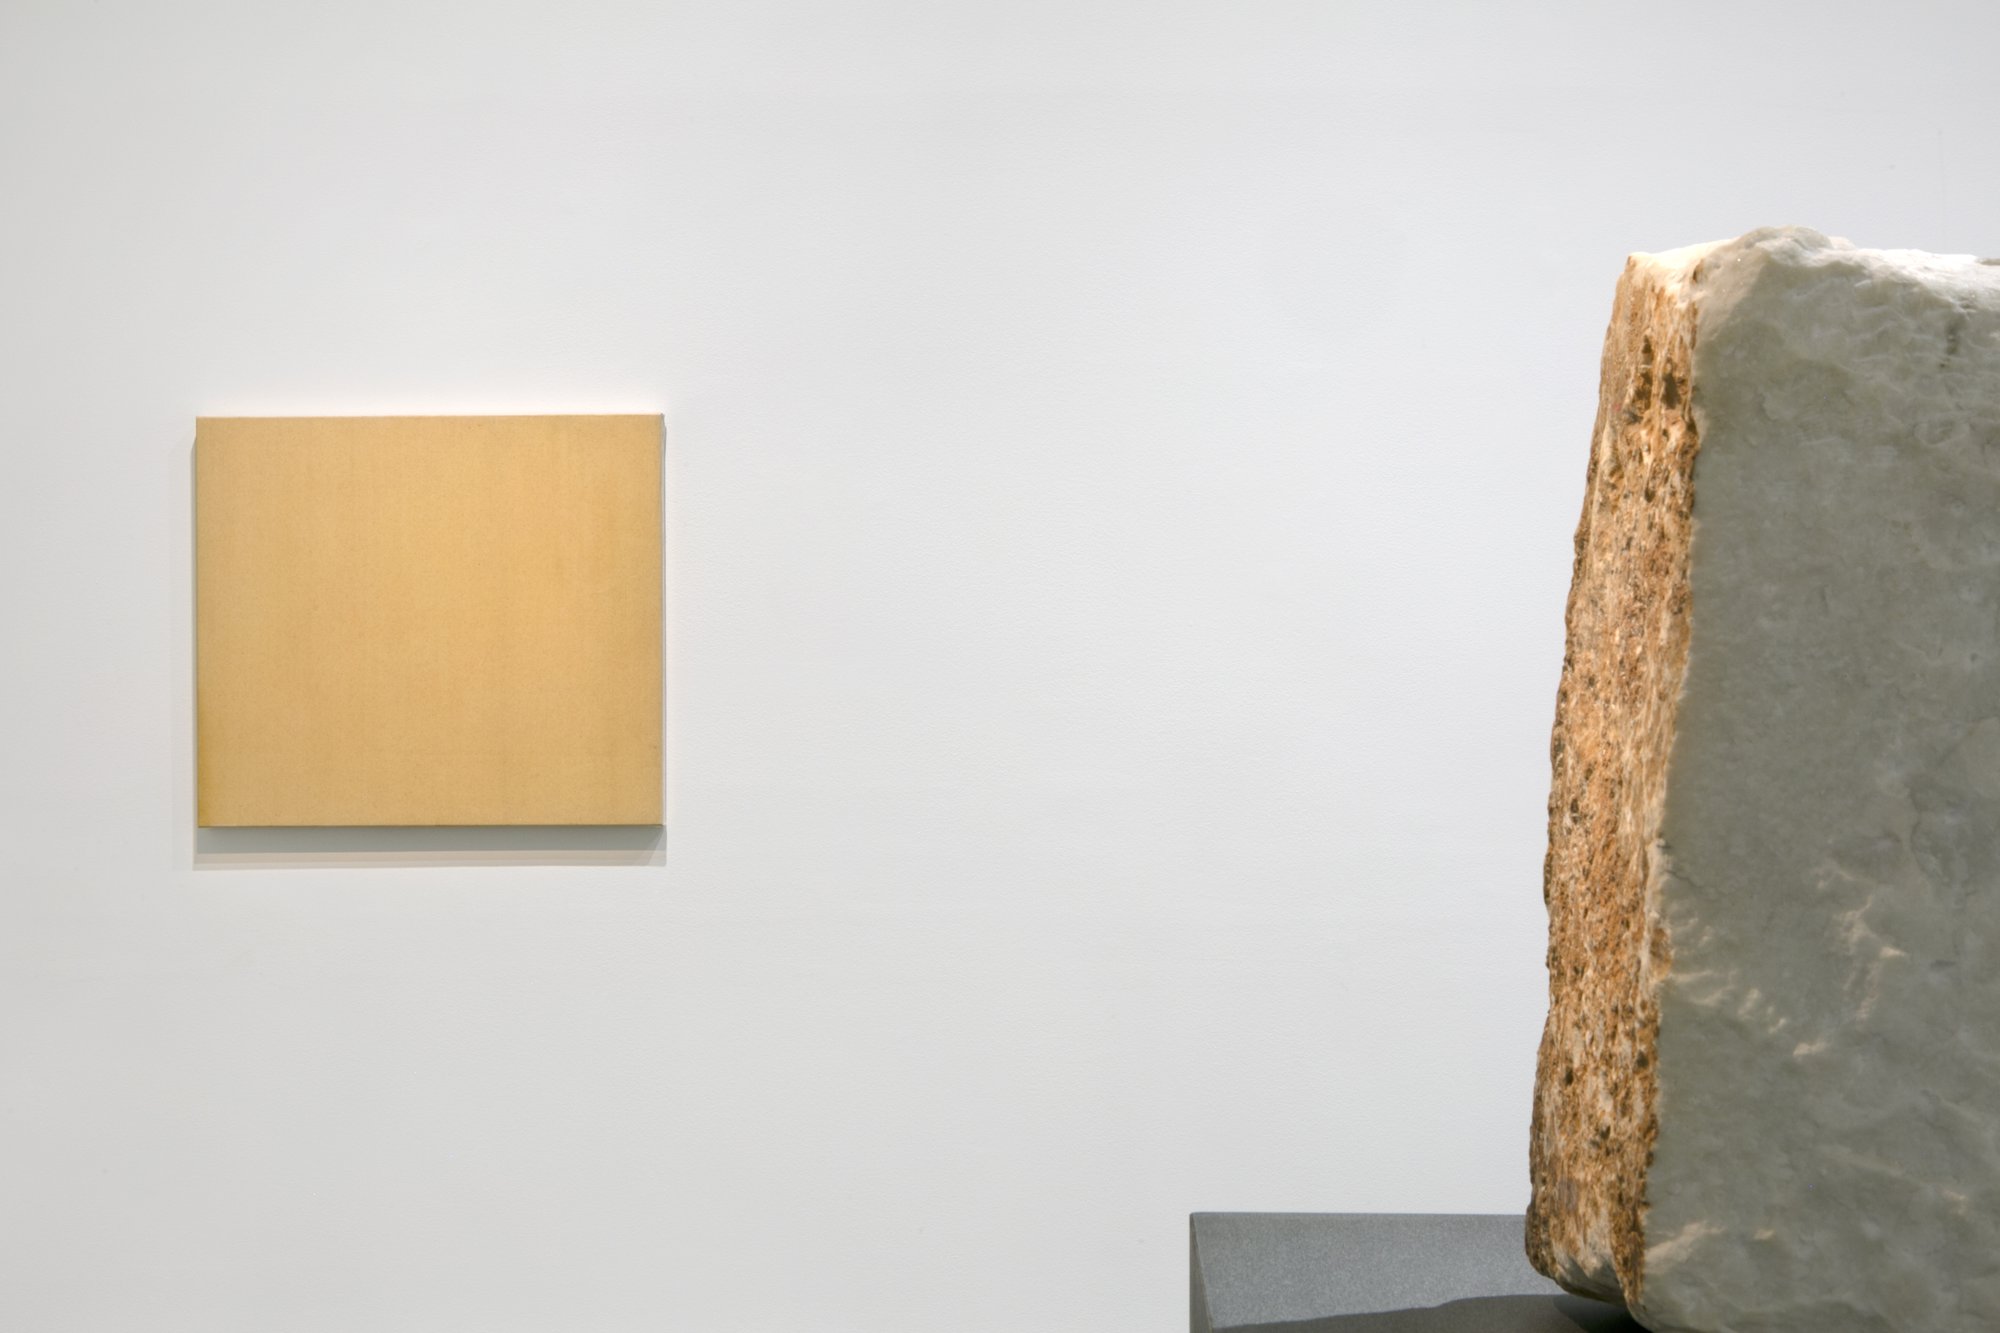 Christodoulos Panayiotou, Installation view, LUX S. 1003 334, Musée d’ Orsay, Paris, 2019